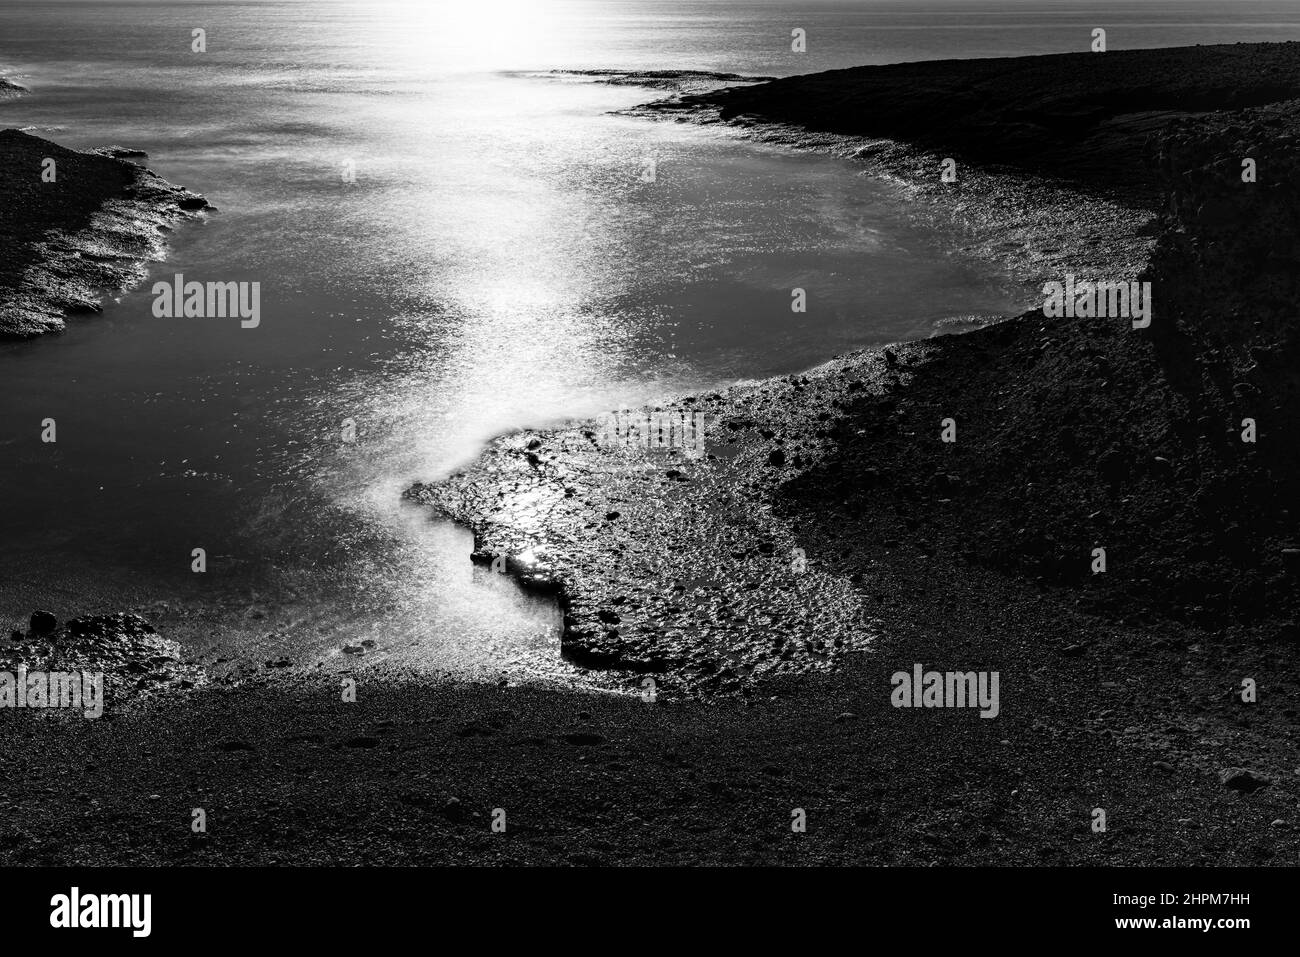 Long exposure image of a sea cove with sunlight glinting off the water in Tajao, Tenerife, Canary Islands, Spain Stock Photo